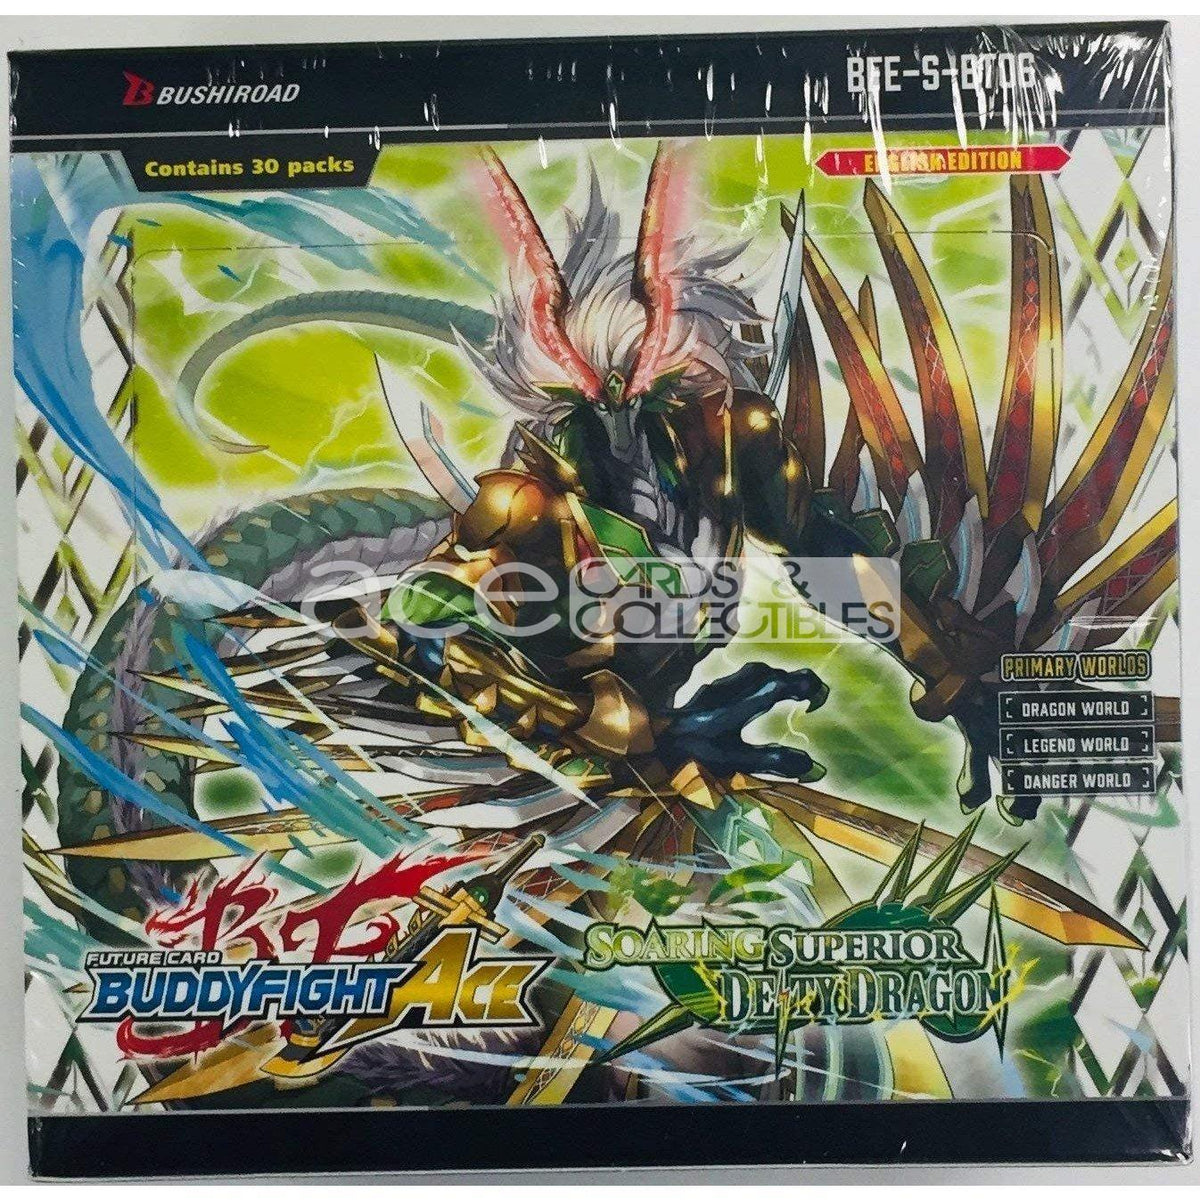 Future Card Buddyfight Ace Soaring Superior Deity Dragon [BFE-S-BT06] (English)-Booster Box (30packs)-Bushiroad-Ace Cards &amp; Collectibles